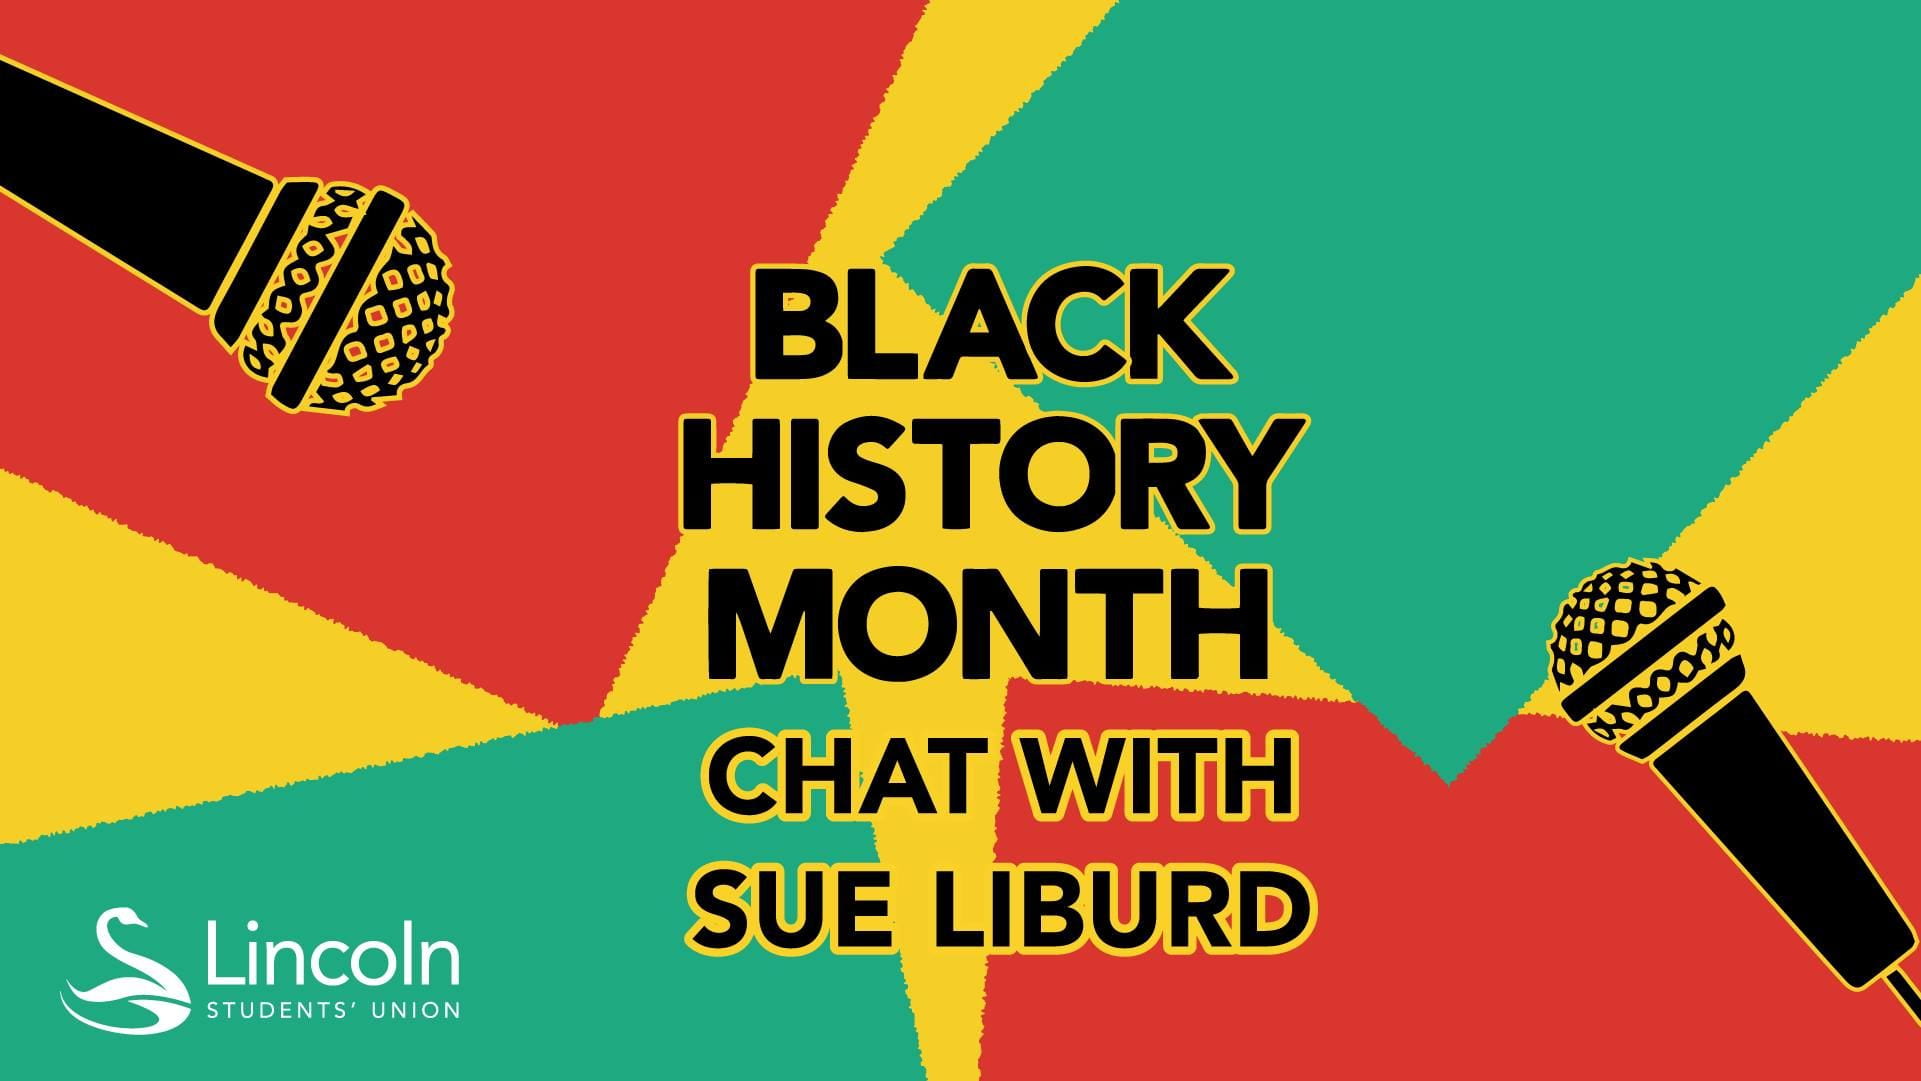 Lincoln SU's poster for Black History Month, Chat with Sue Liburd